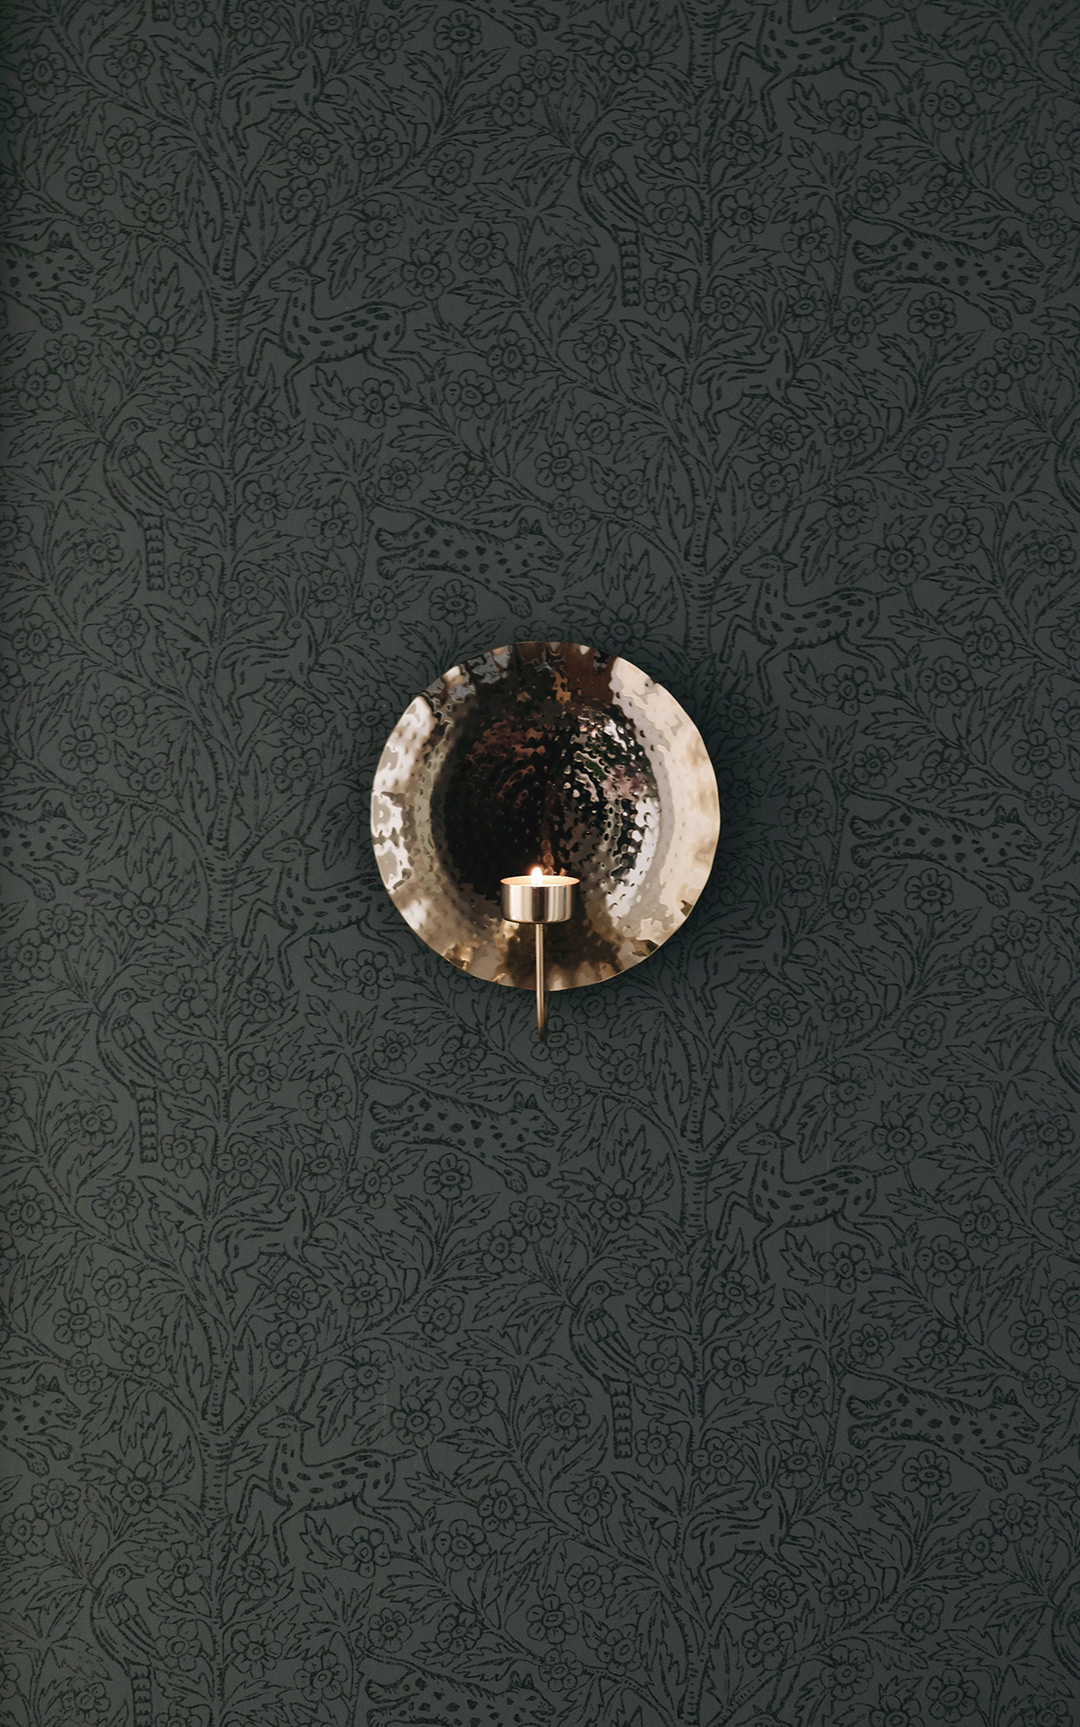 H&M home brass candle sconce on dark green wallpaper